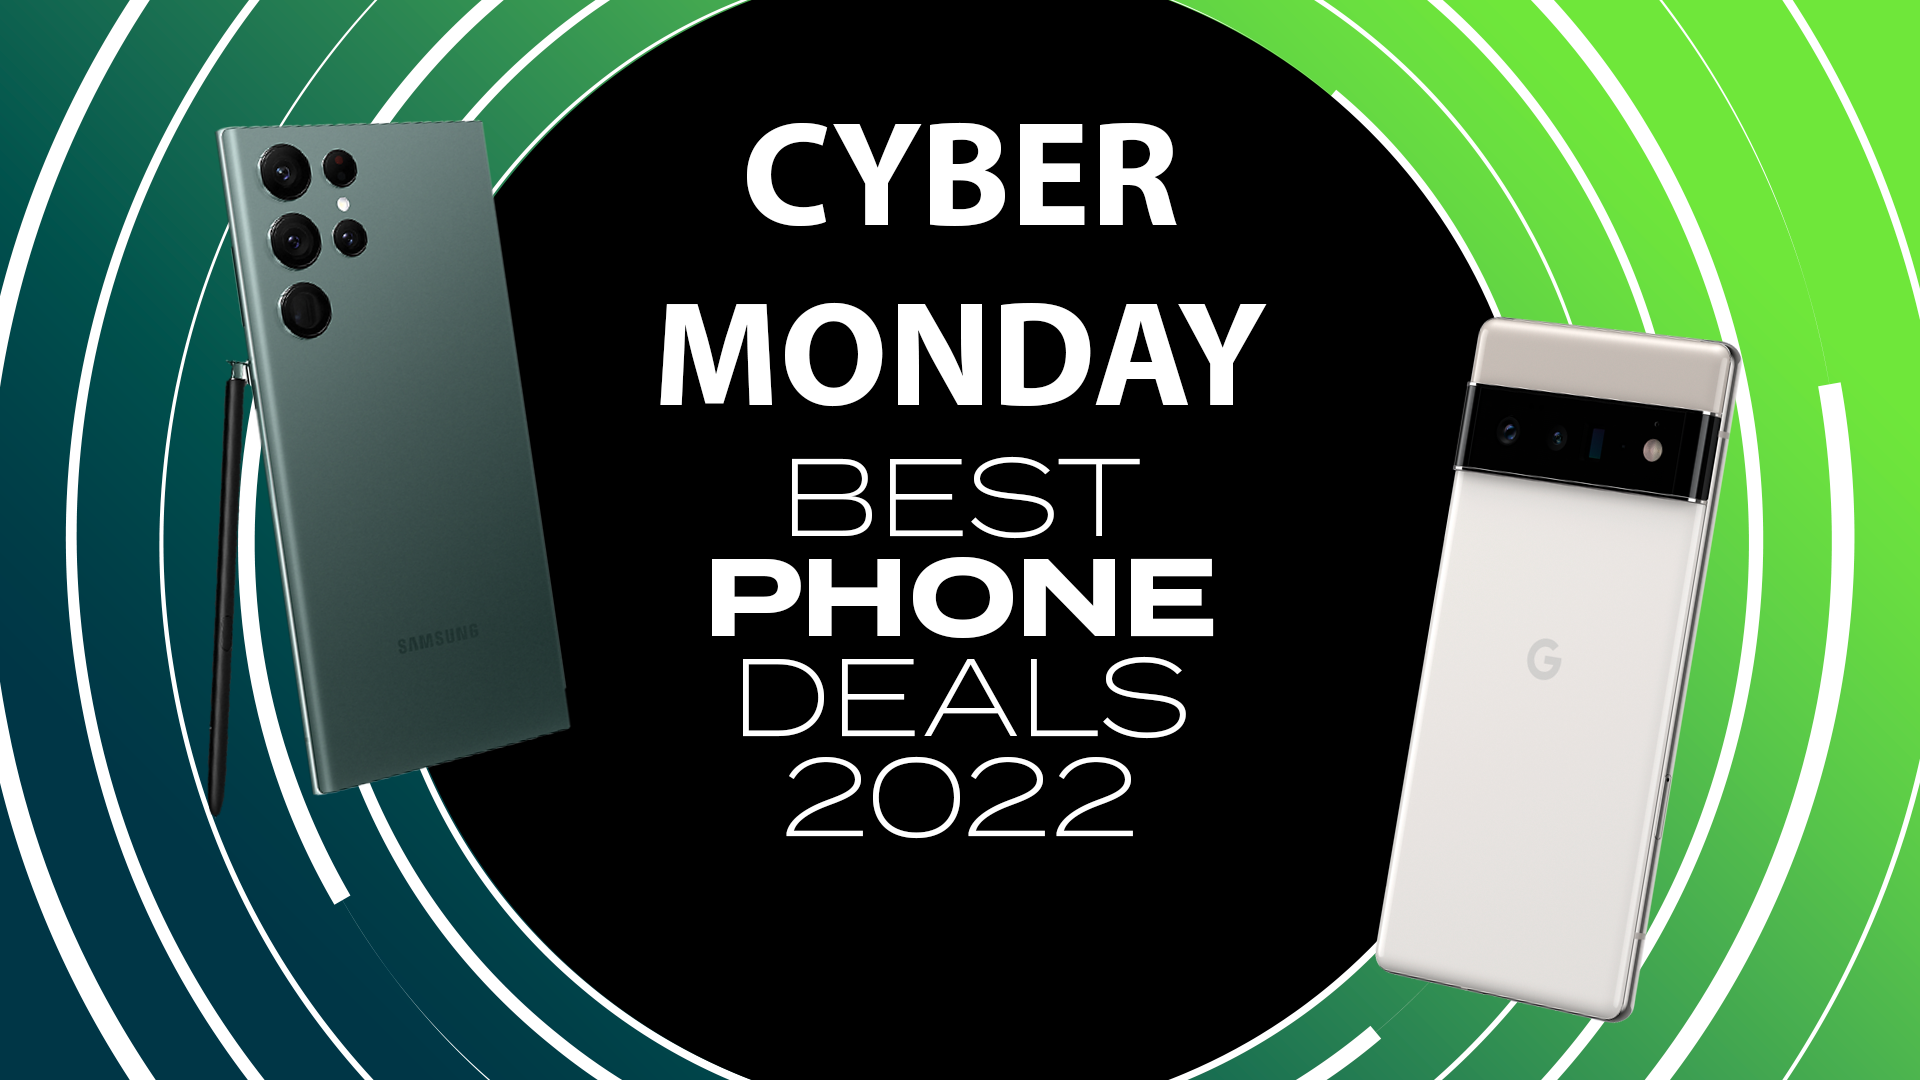 Image for Cyber Monday mobile phone deals 2022: best offers and discounts